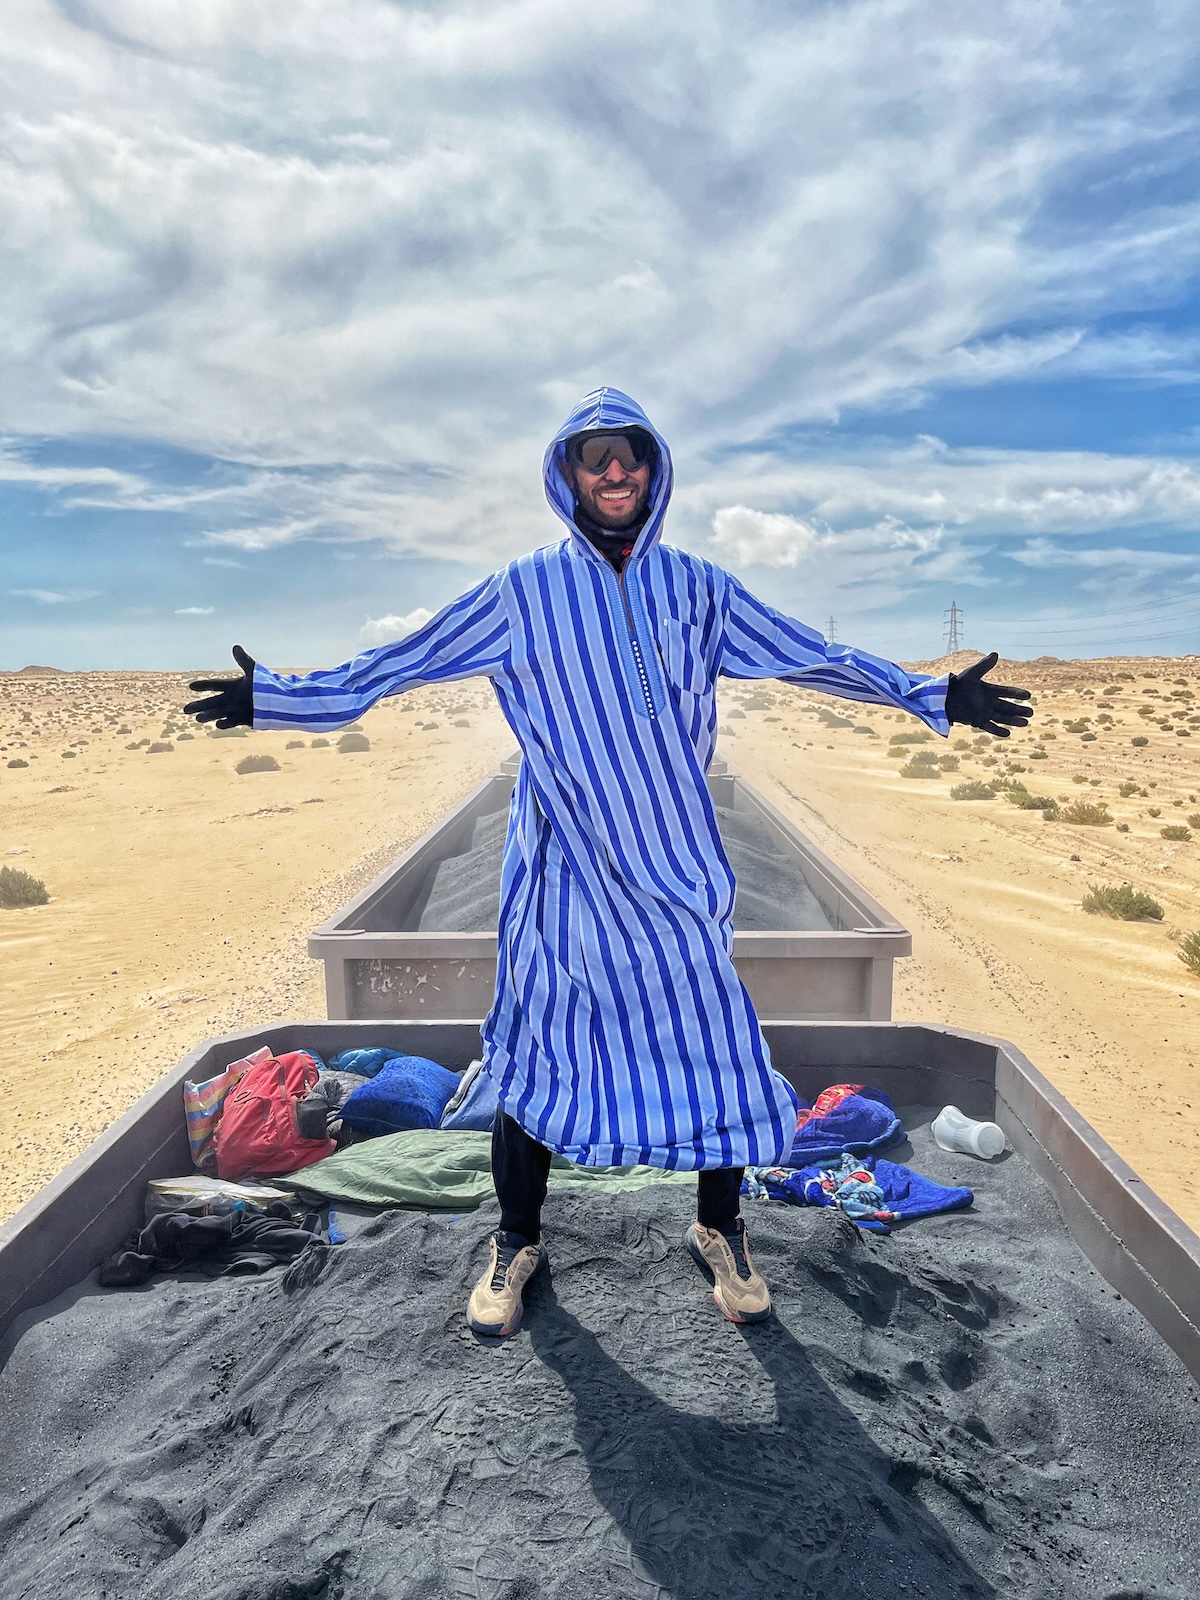 A man poses while riding on the iron ore train in Mauritania 